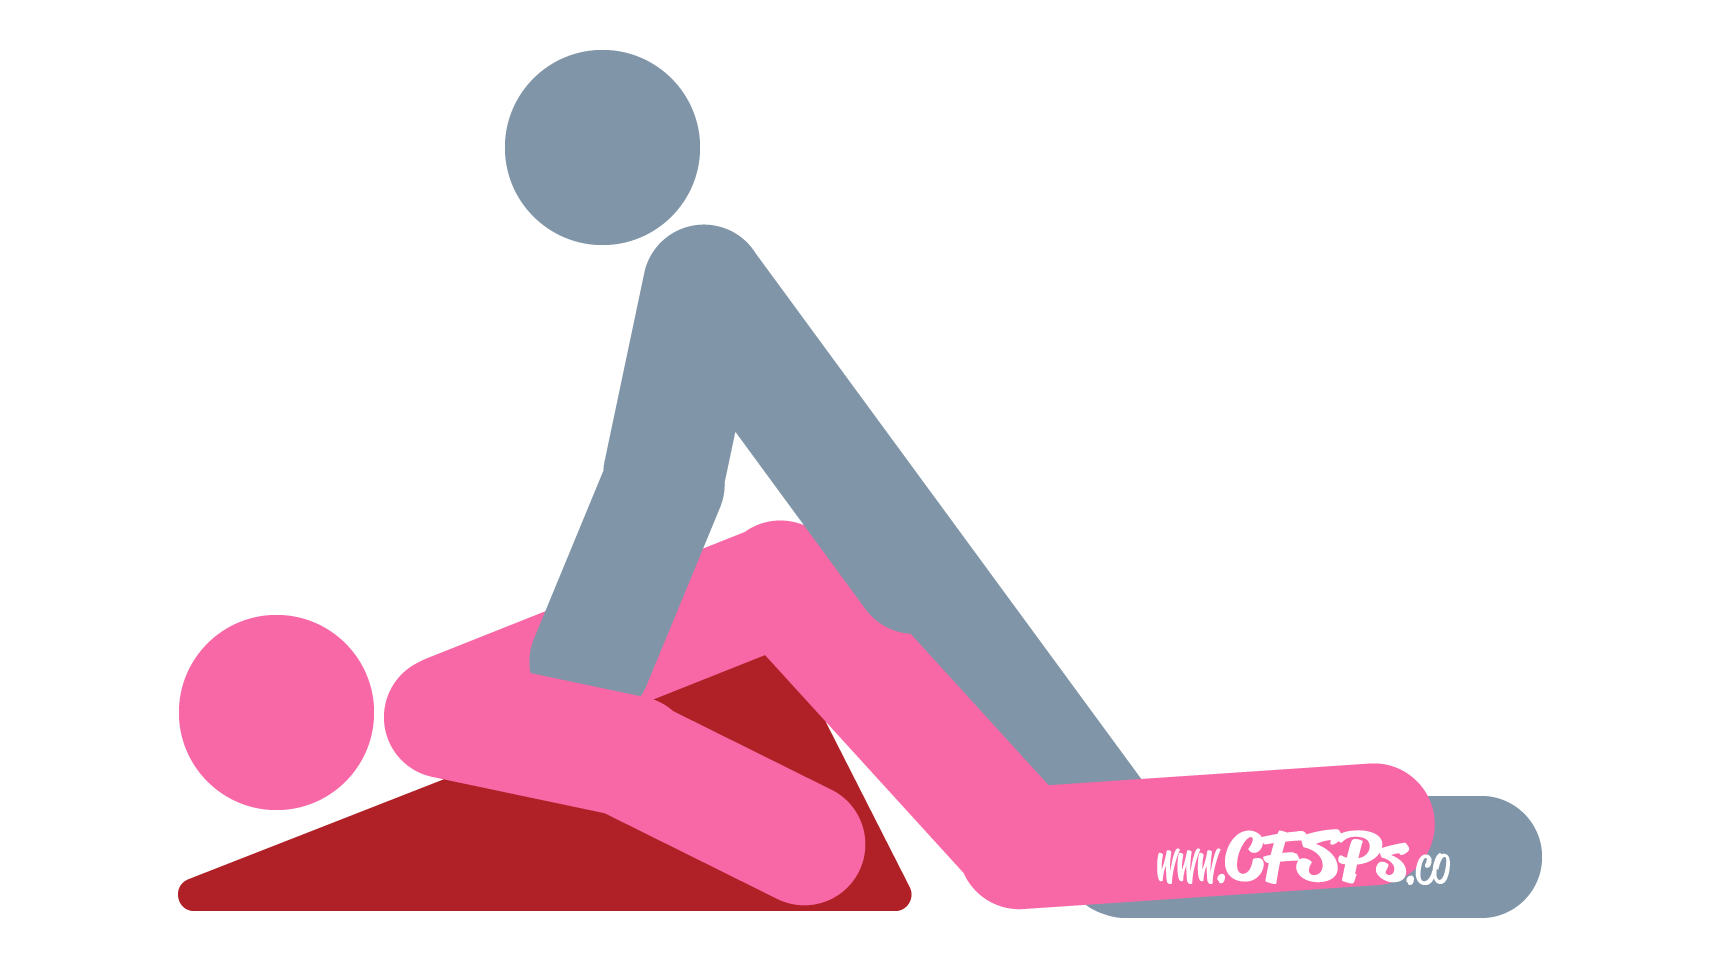 The Flatiron Sex Position in clubs